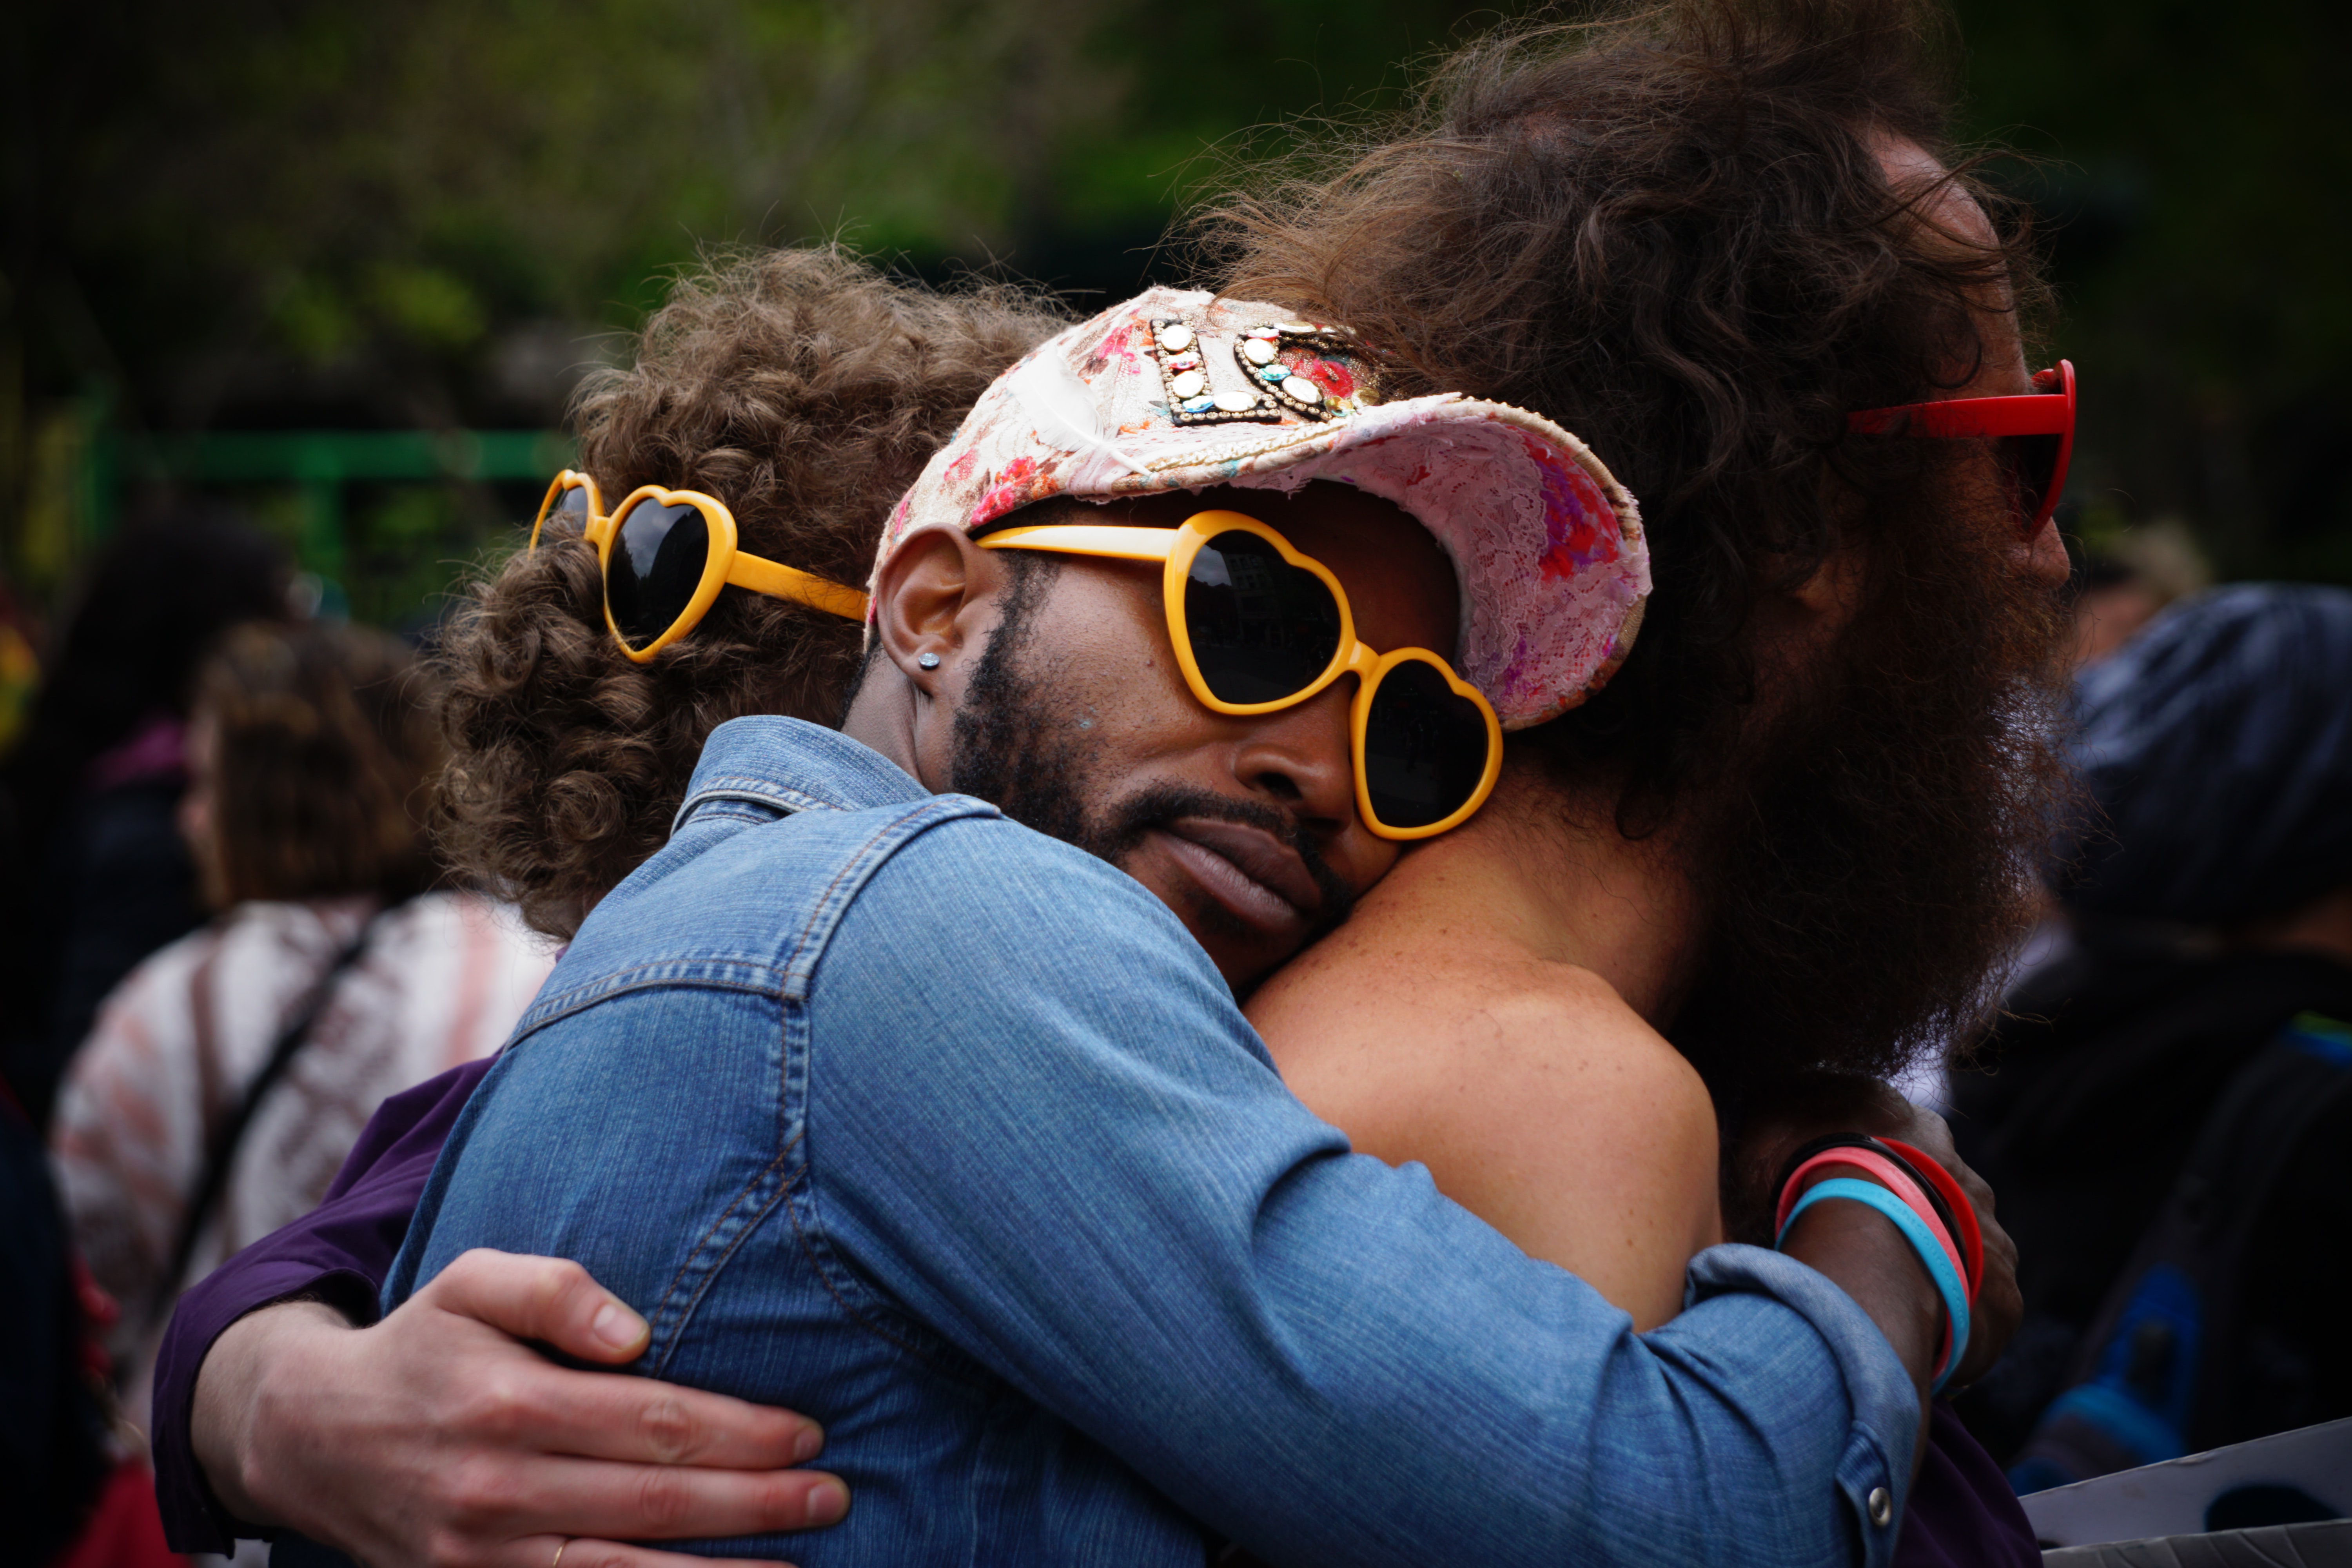 A group of multi ethnic men are in a group hug while wearing heart shaped sunglasses.